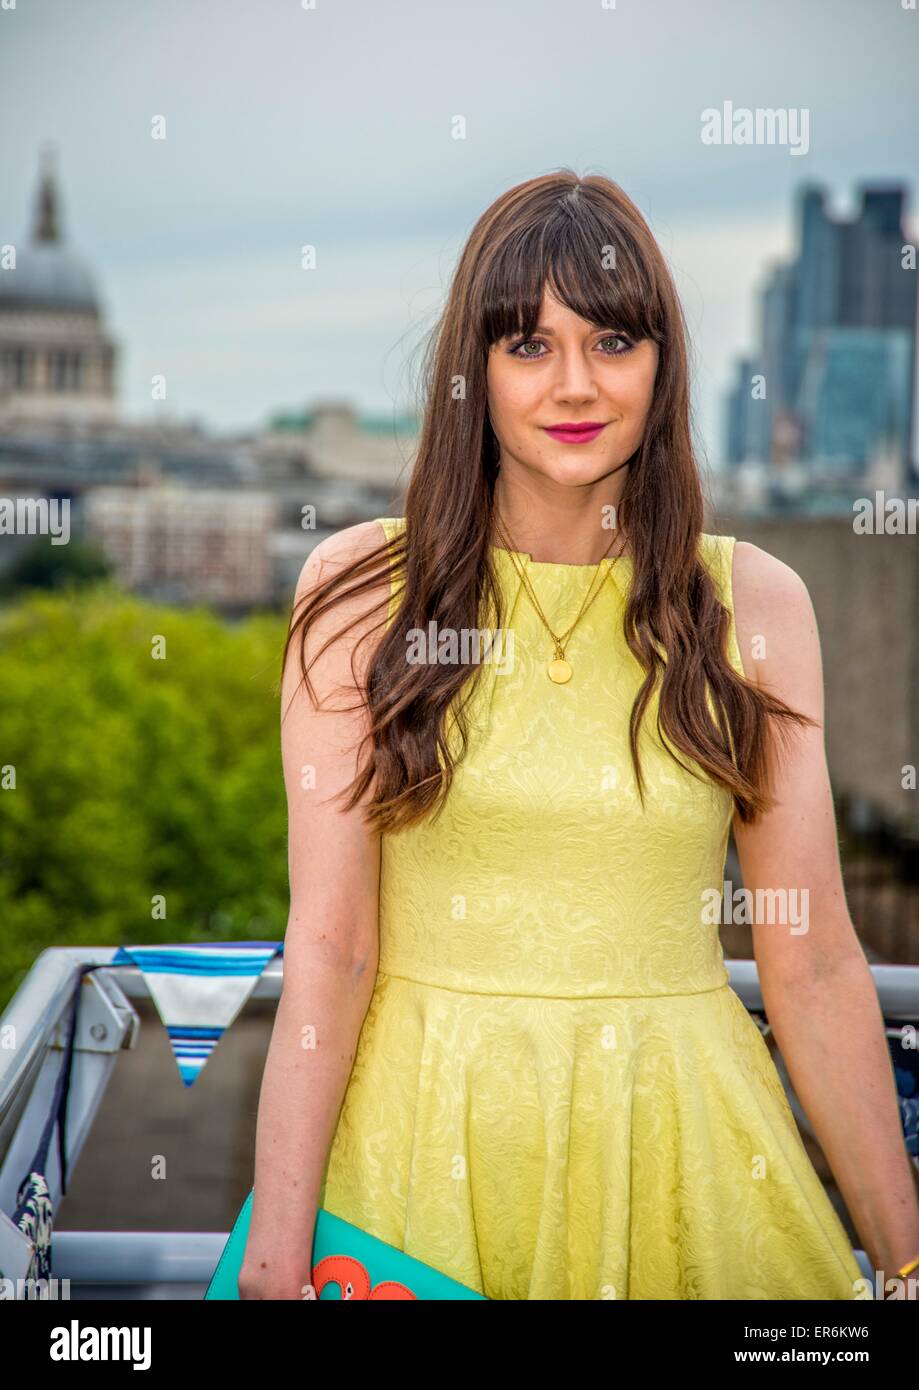 Lila Parsons attending the ‘Closet London Re-Brand Party’ Stock Photo